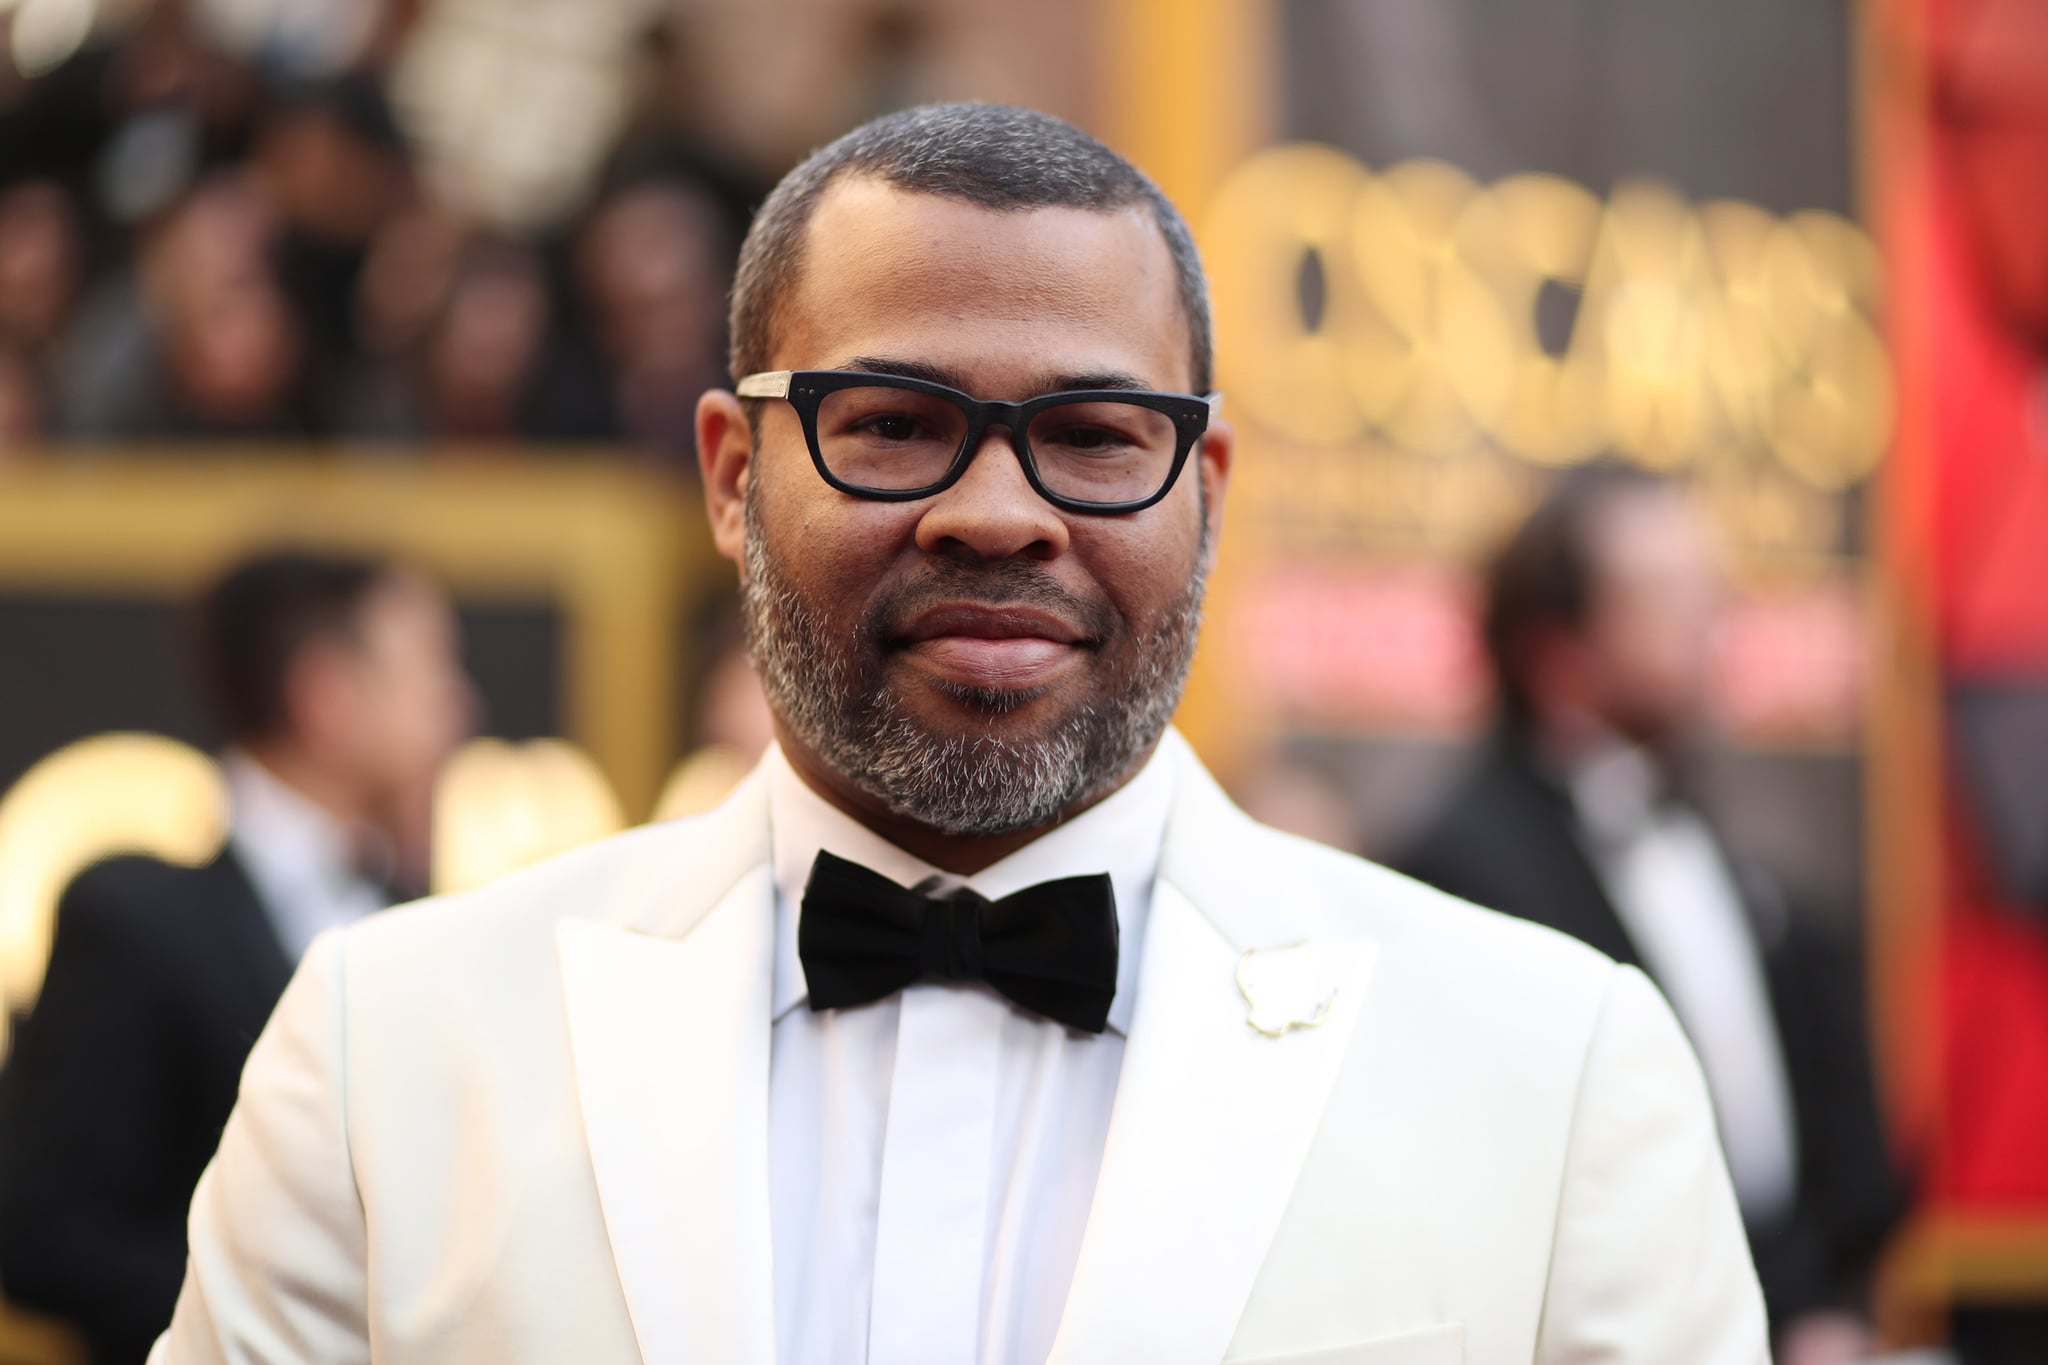 HOLLYWOOD, CA - MARCH 04:  Jordan Peele attends the 90th Annual Academy Awards at Hollywood & Highland centre on March 4, 2018 in Hollywood, California.  (Photo by Christopher Polk/Getty Images)